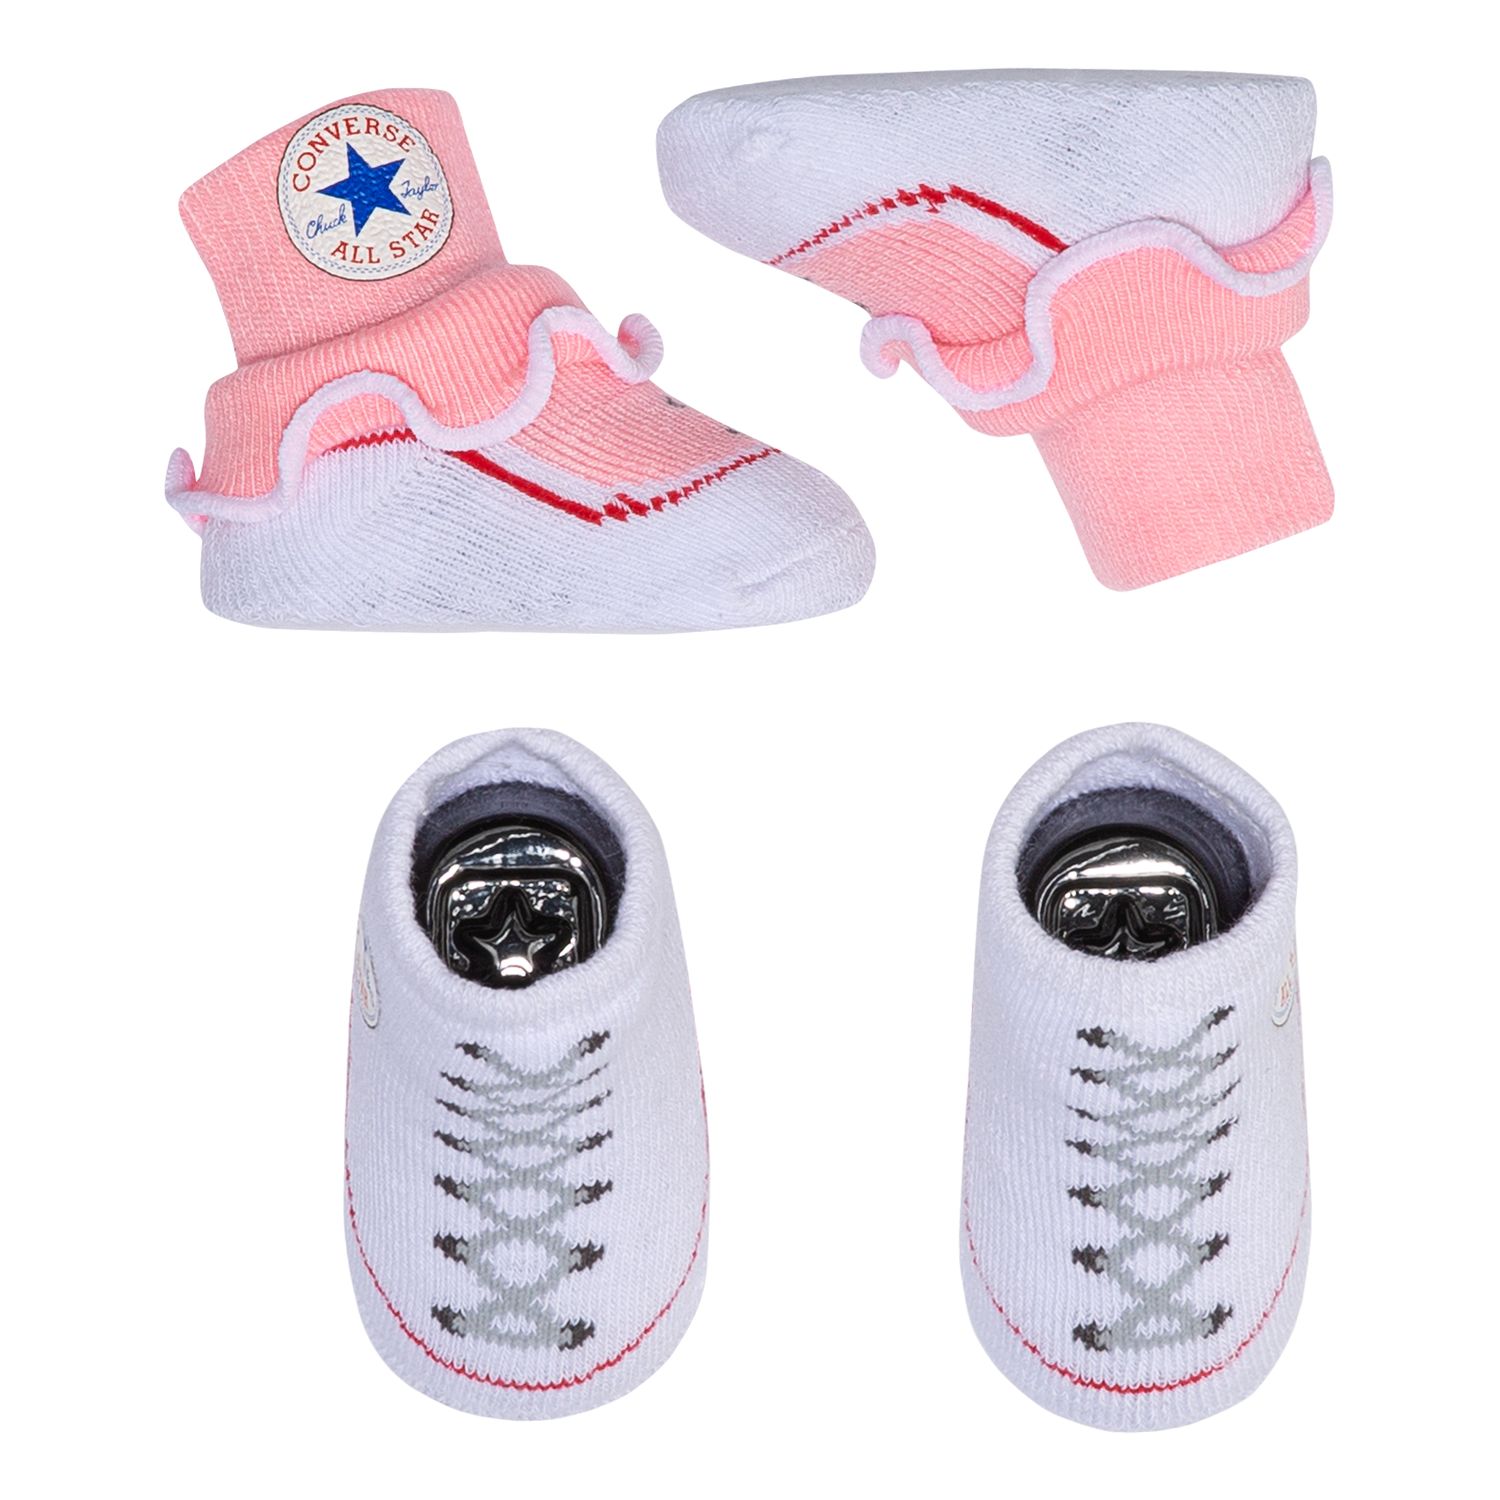 converse baby pack